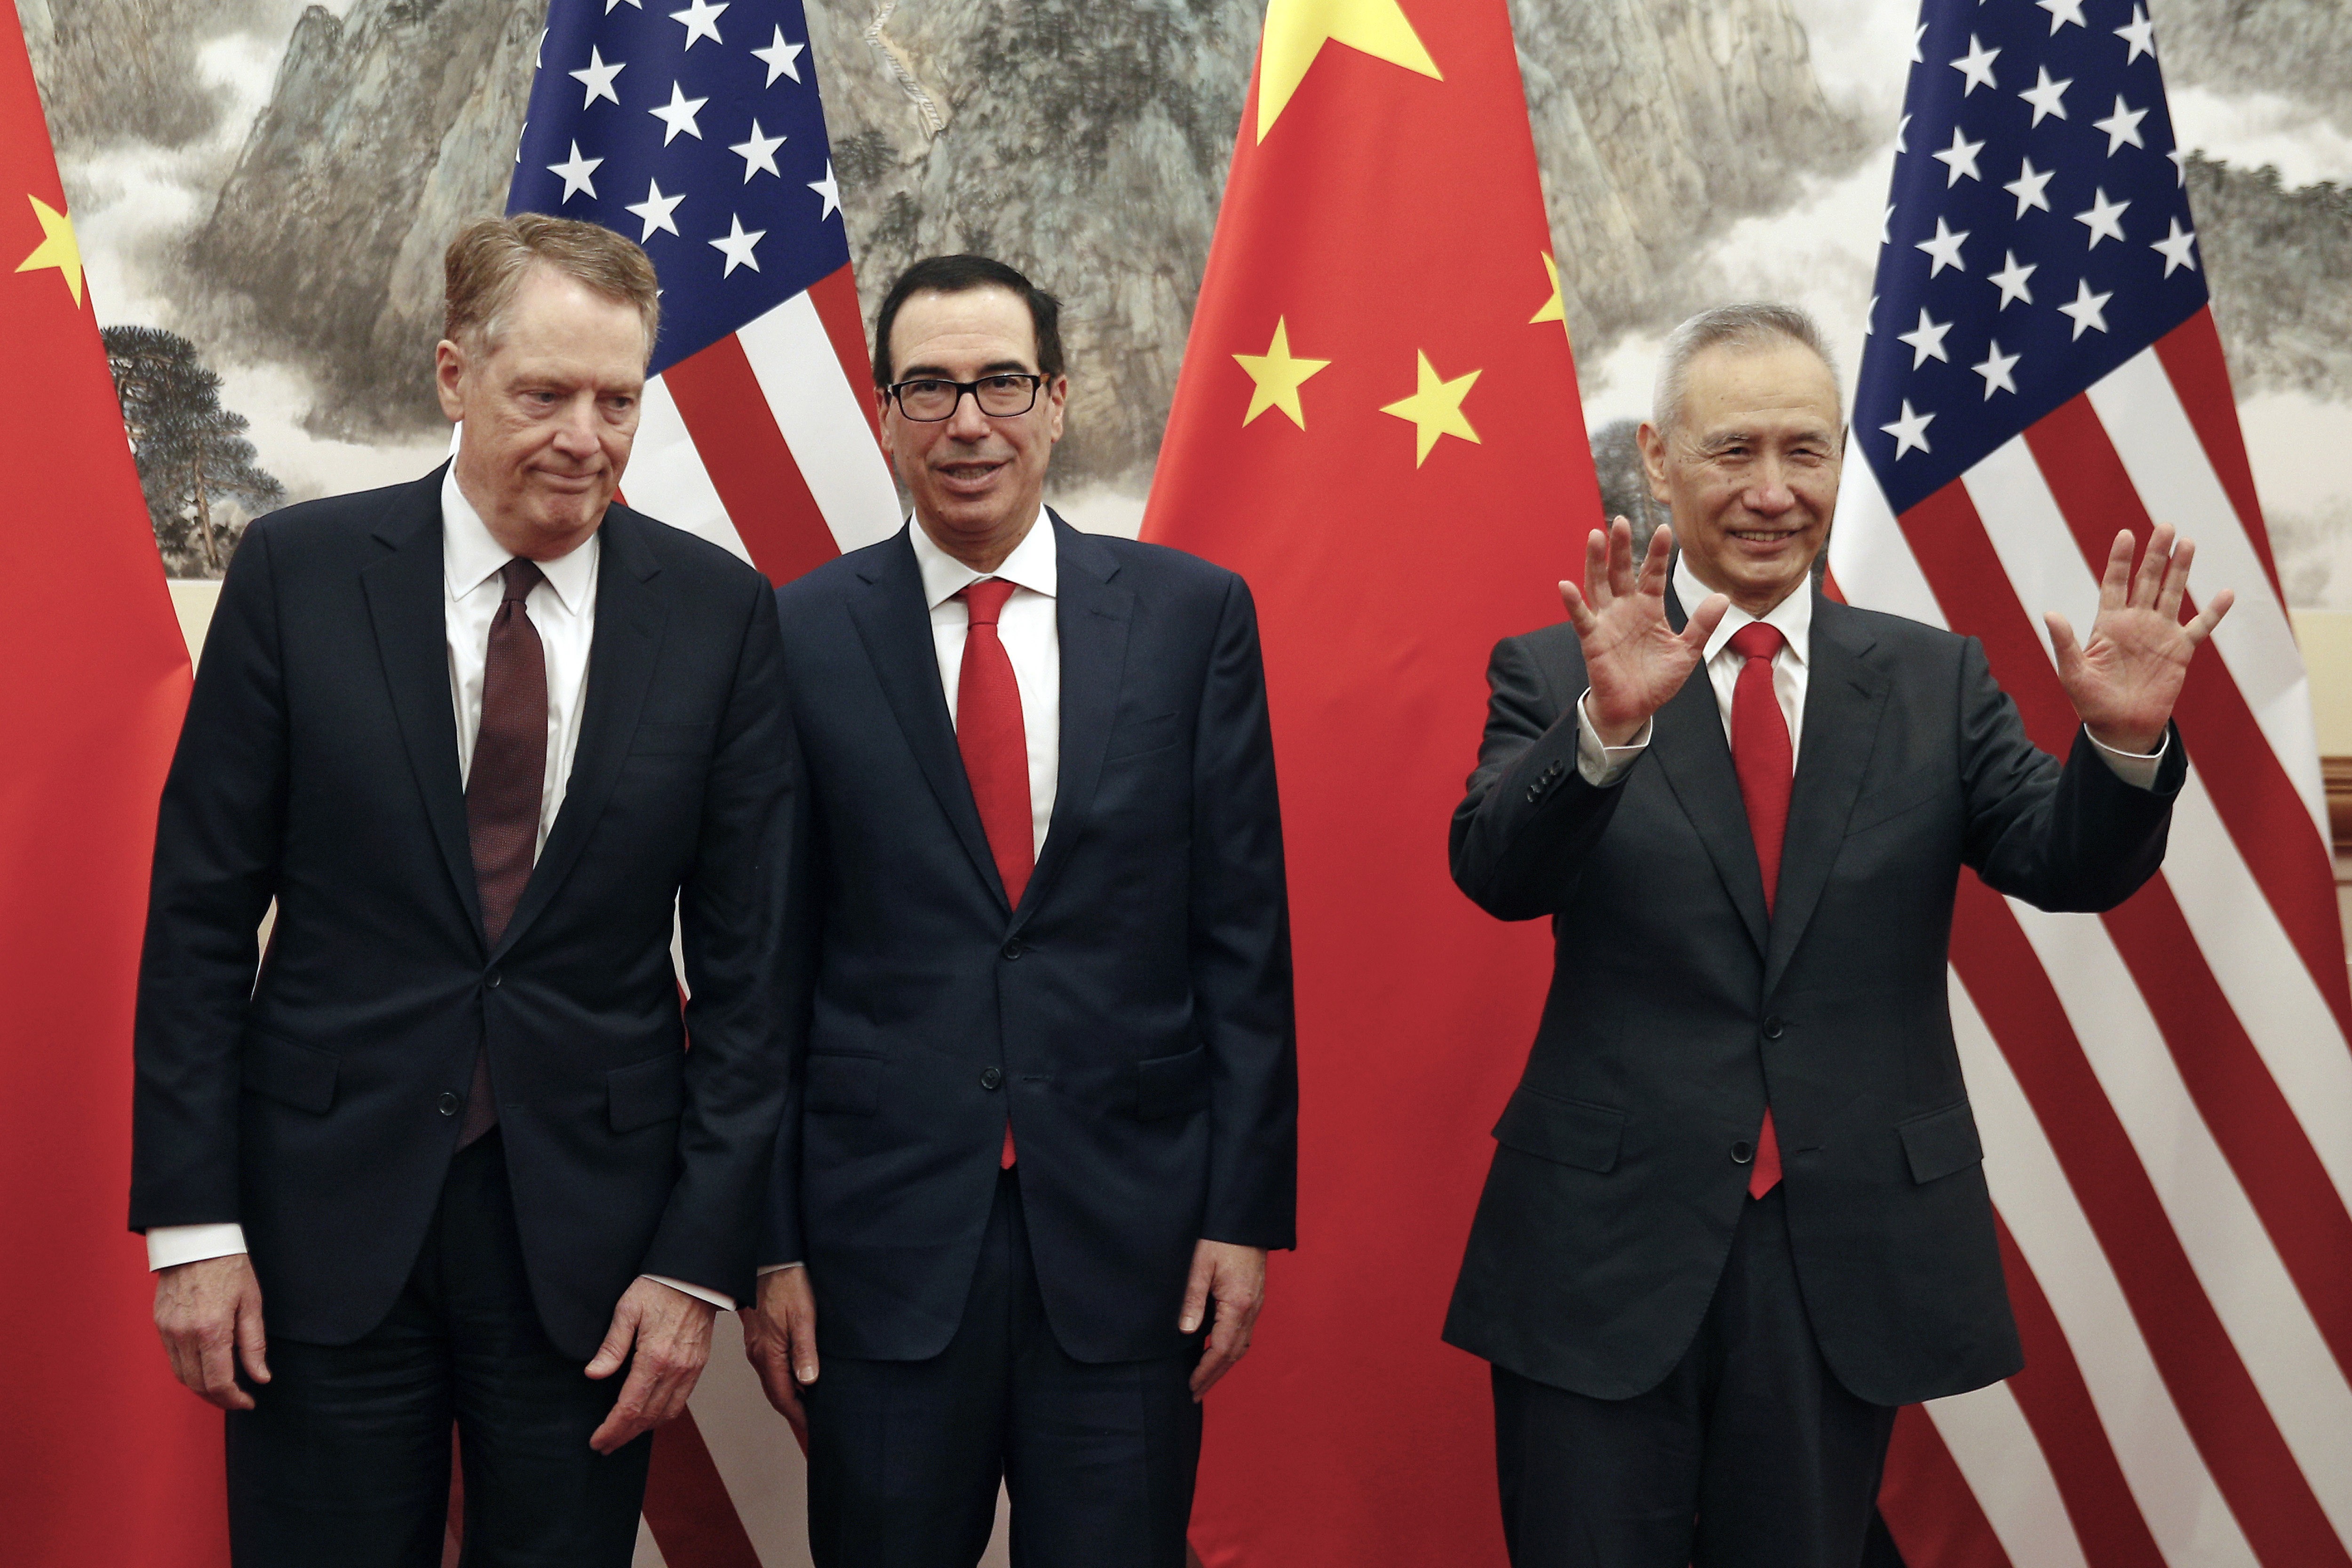 Chinese Vice-Premier Liu He (right) gestures as US Treasury Secretary Steven Mnuchin (centre) chats with Trade Representative Robert Lighthizer before their meeting at the Diaoyutai State Guesthouse in Beijing on May 1. President Donald Trump has turned up the pressure on China, threatening to hike tariffs on US$200 billion worth of Chinese goods. Photo: AP